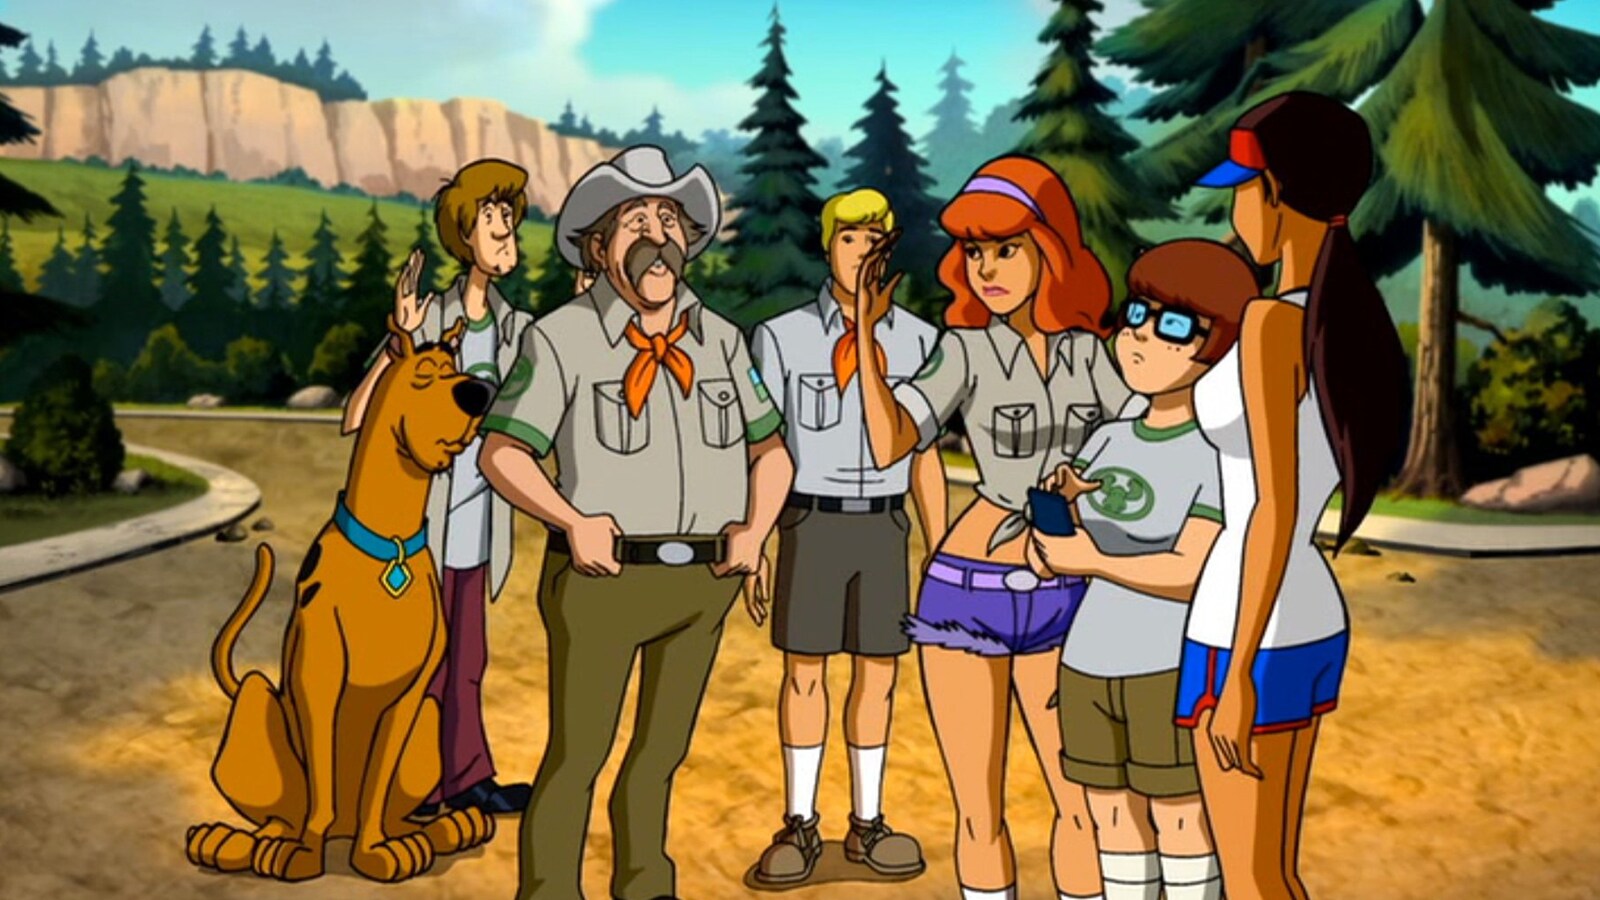 scooby-doo-camp-scare-2010